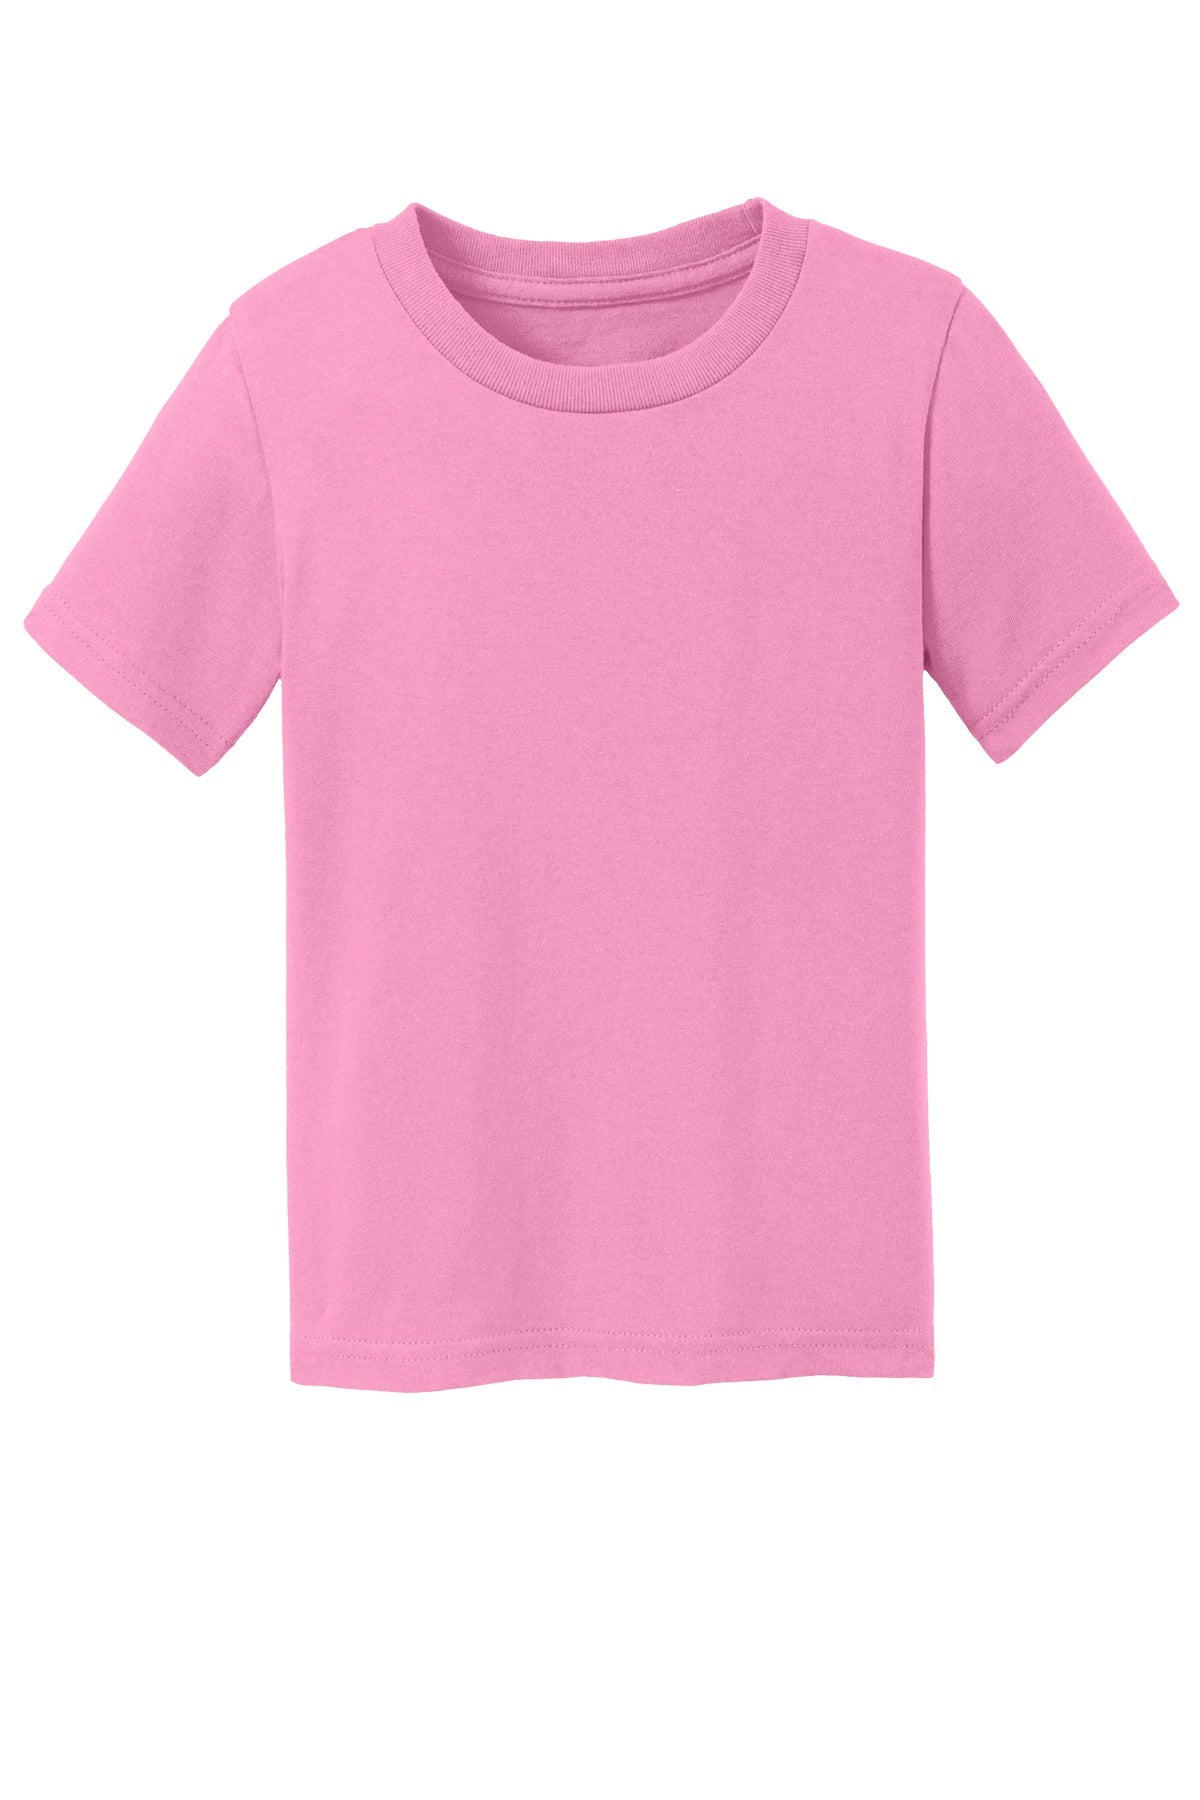 Port & Co Car54T Toddler T-Shirt 2T / Candy Pink